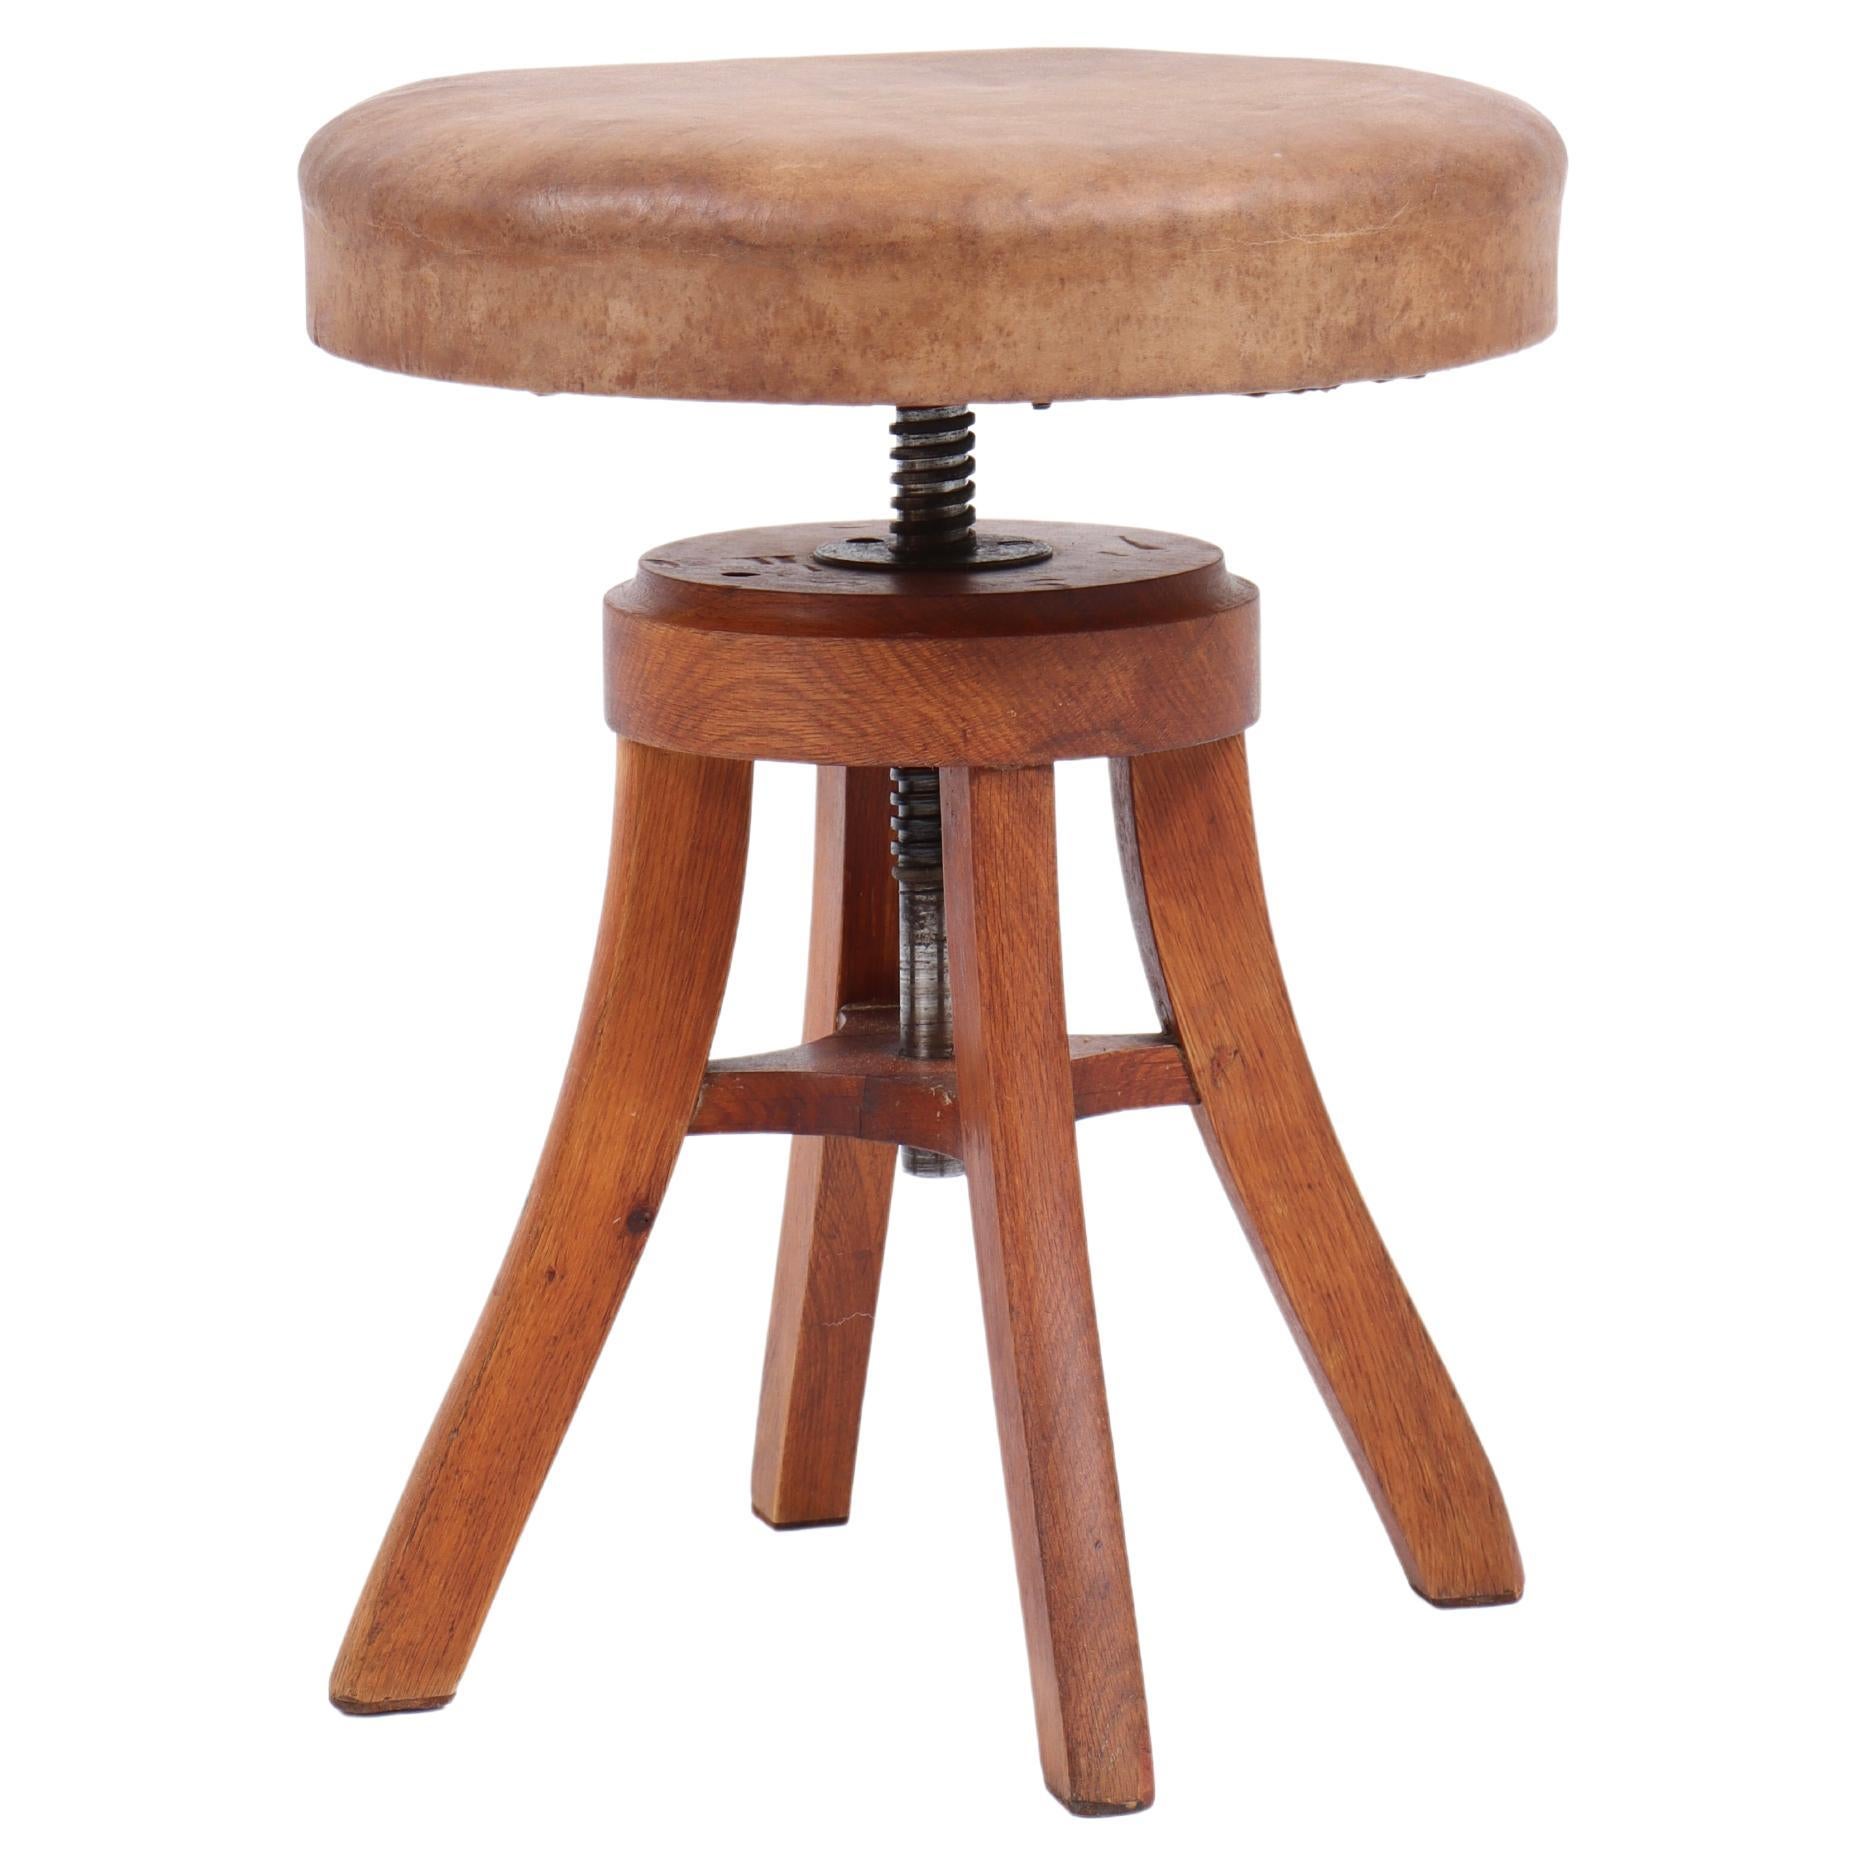 Adjustable Artist Stool in Oak and Patinated Leather, Denmark, 1930s For Sale